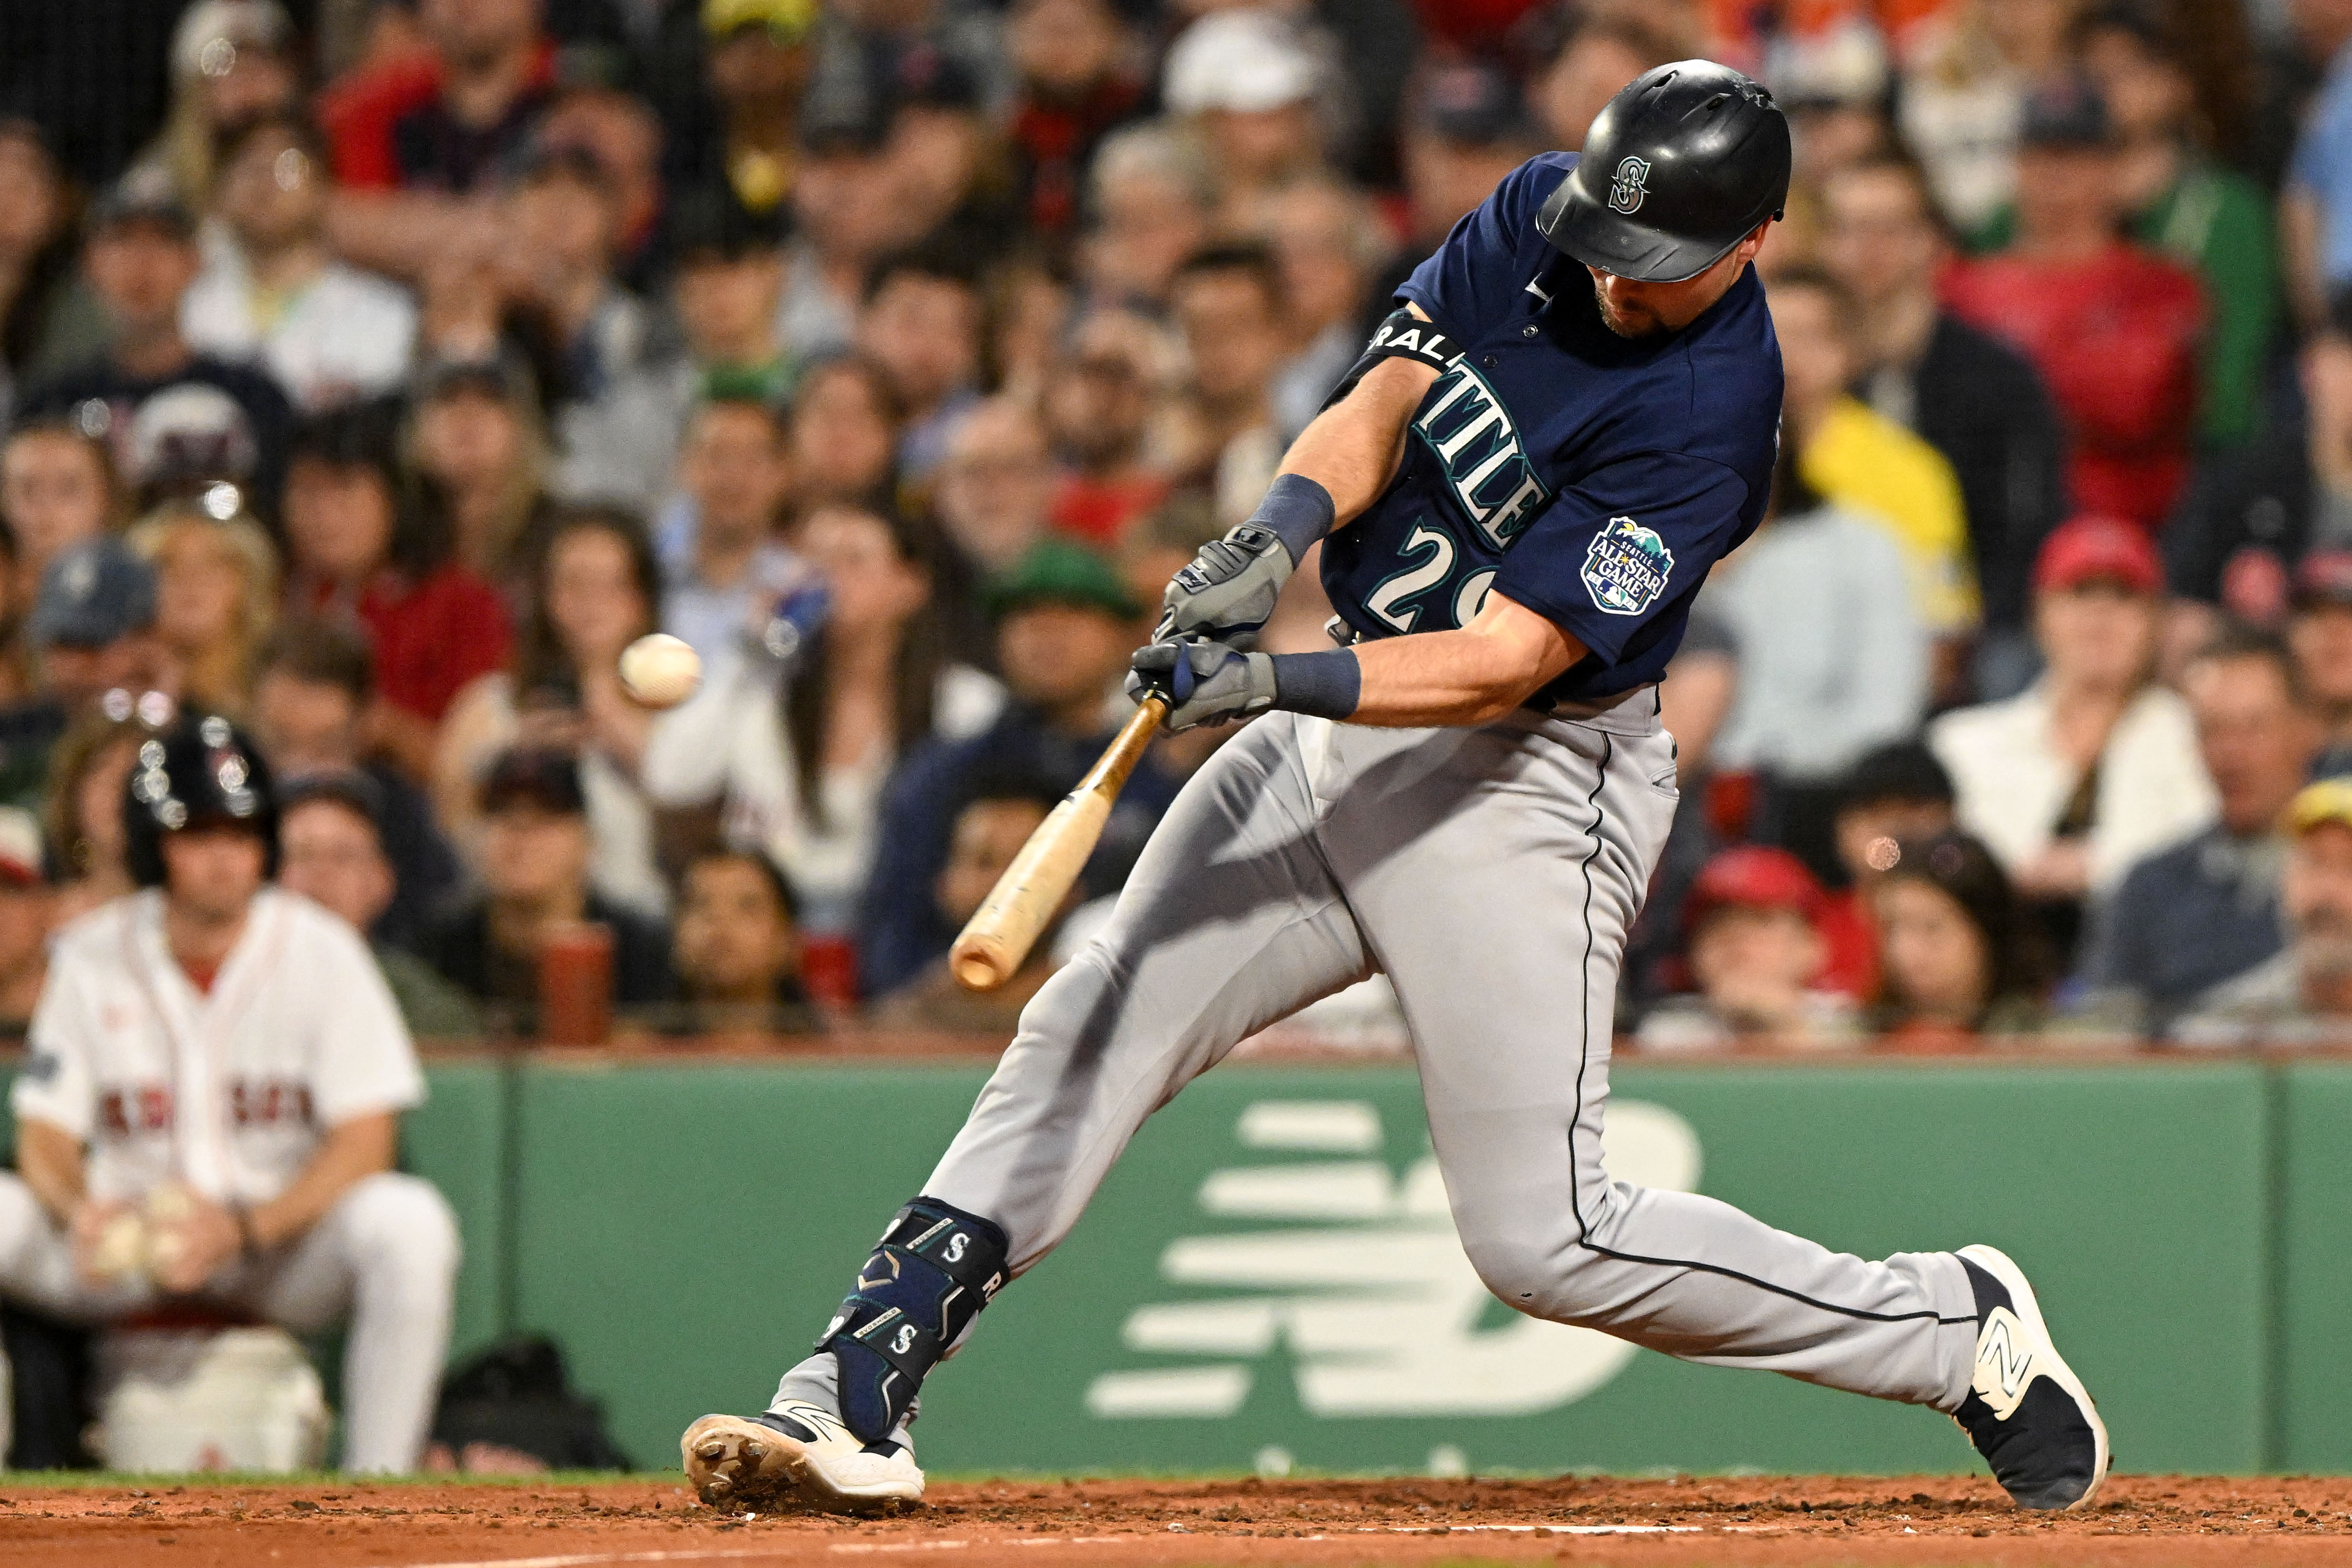 Cal Raleigh makes Fenway Park history as Mariners blast Red Sox